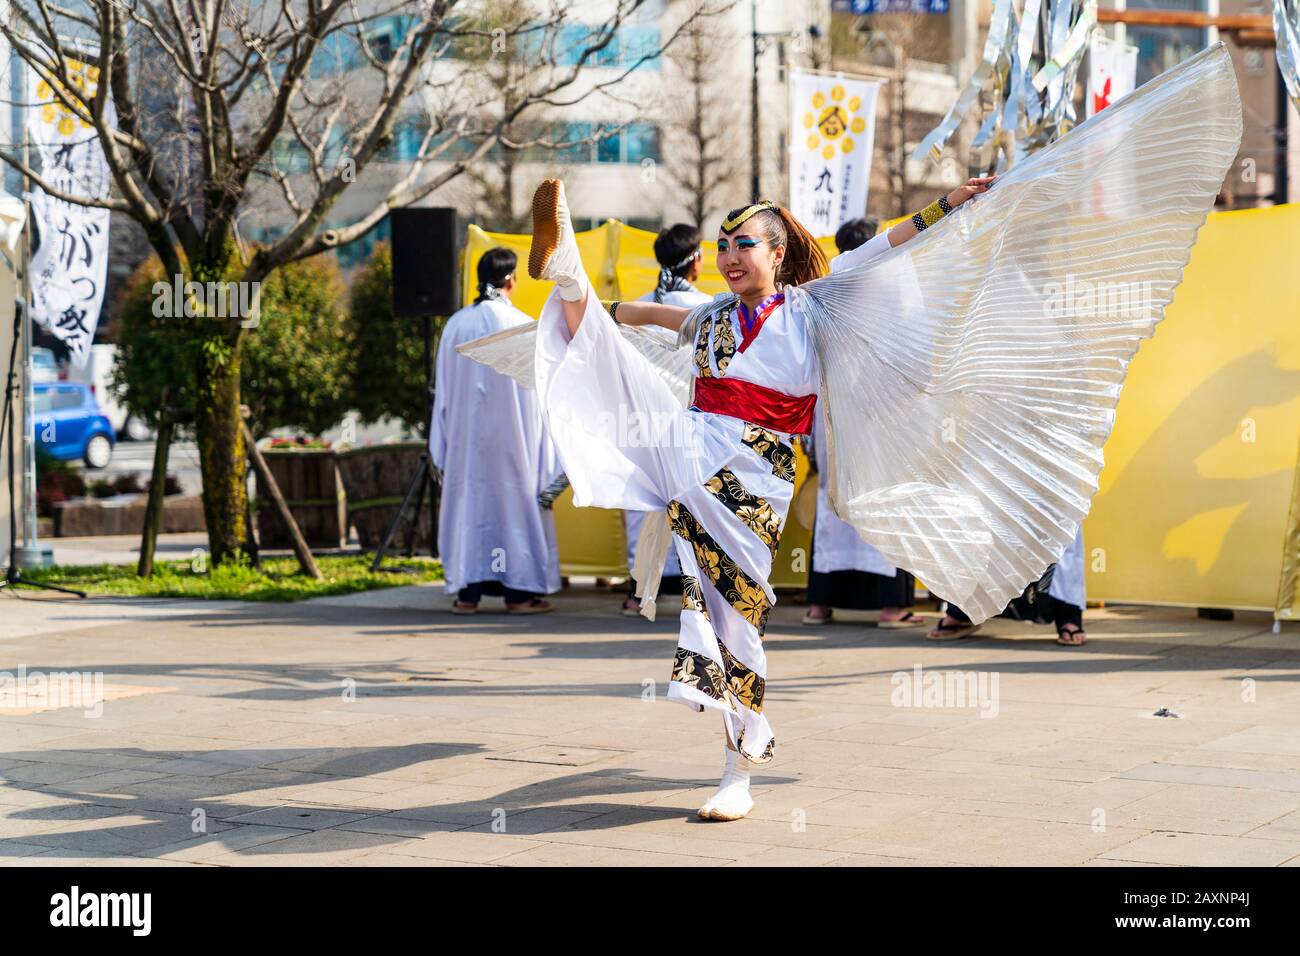 Japanese woman Yosakoi dancer dancing outdoors at the Kyusyu Gassai festival in Kumamoto. Holding and swirling shaped white silk attached to collar. Stock Photo